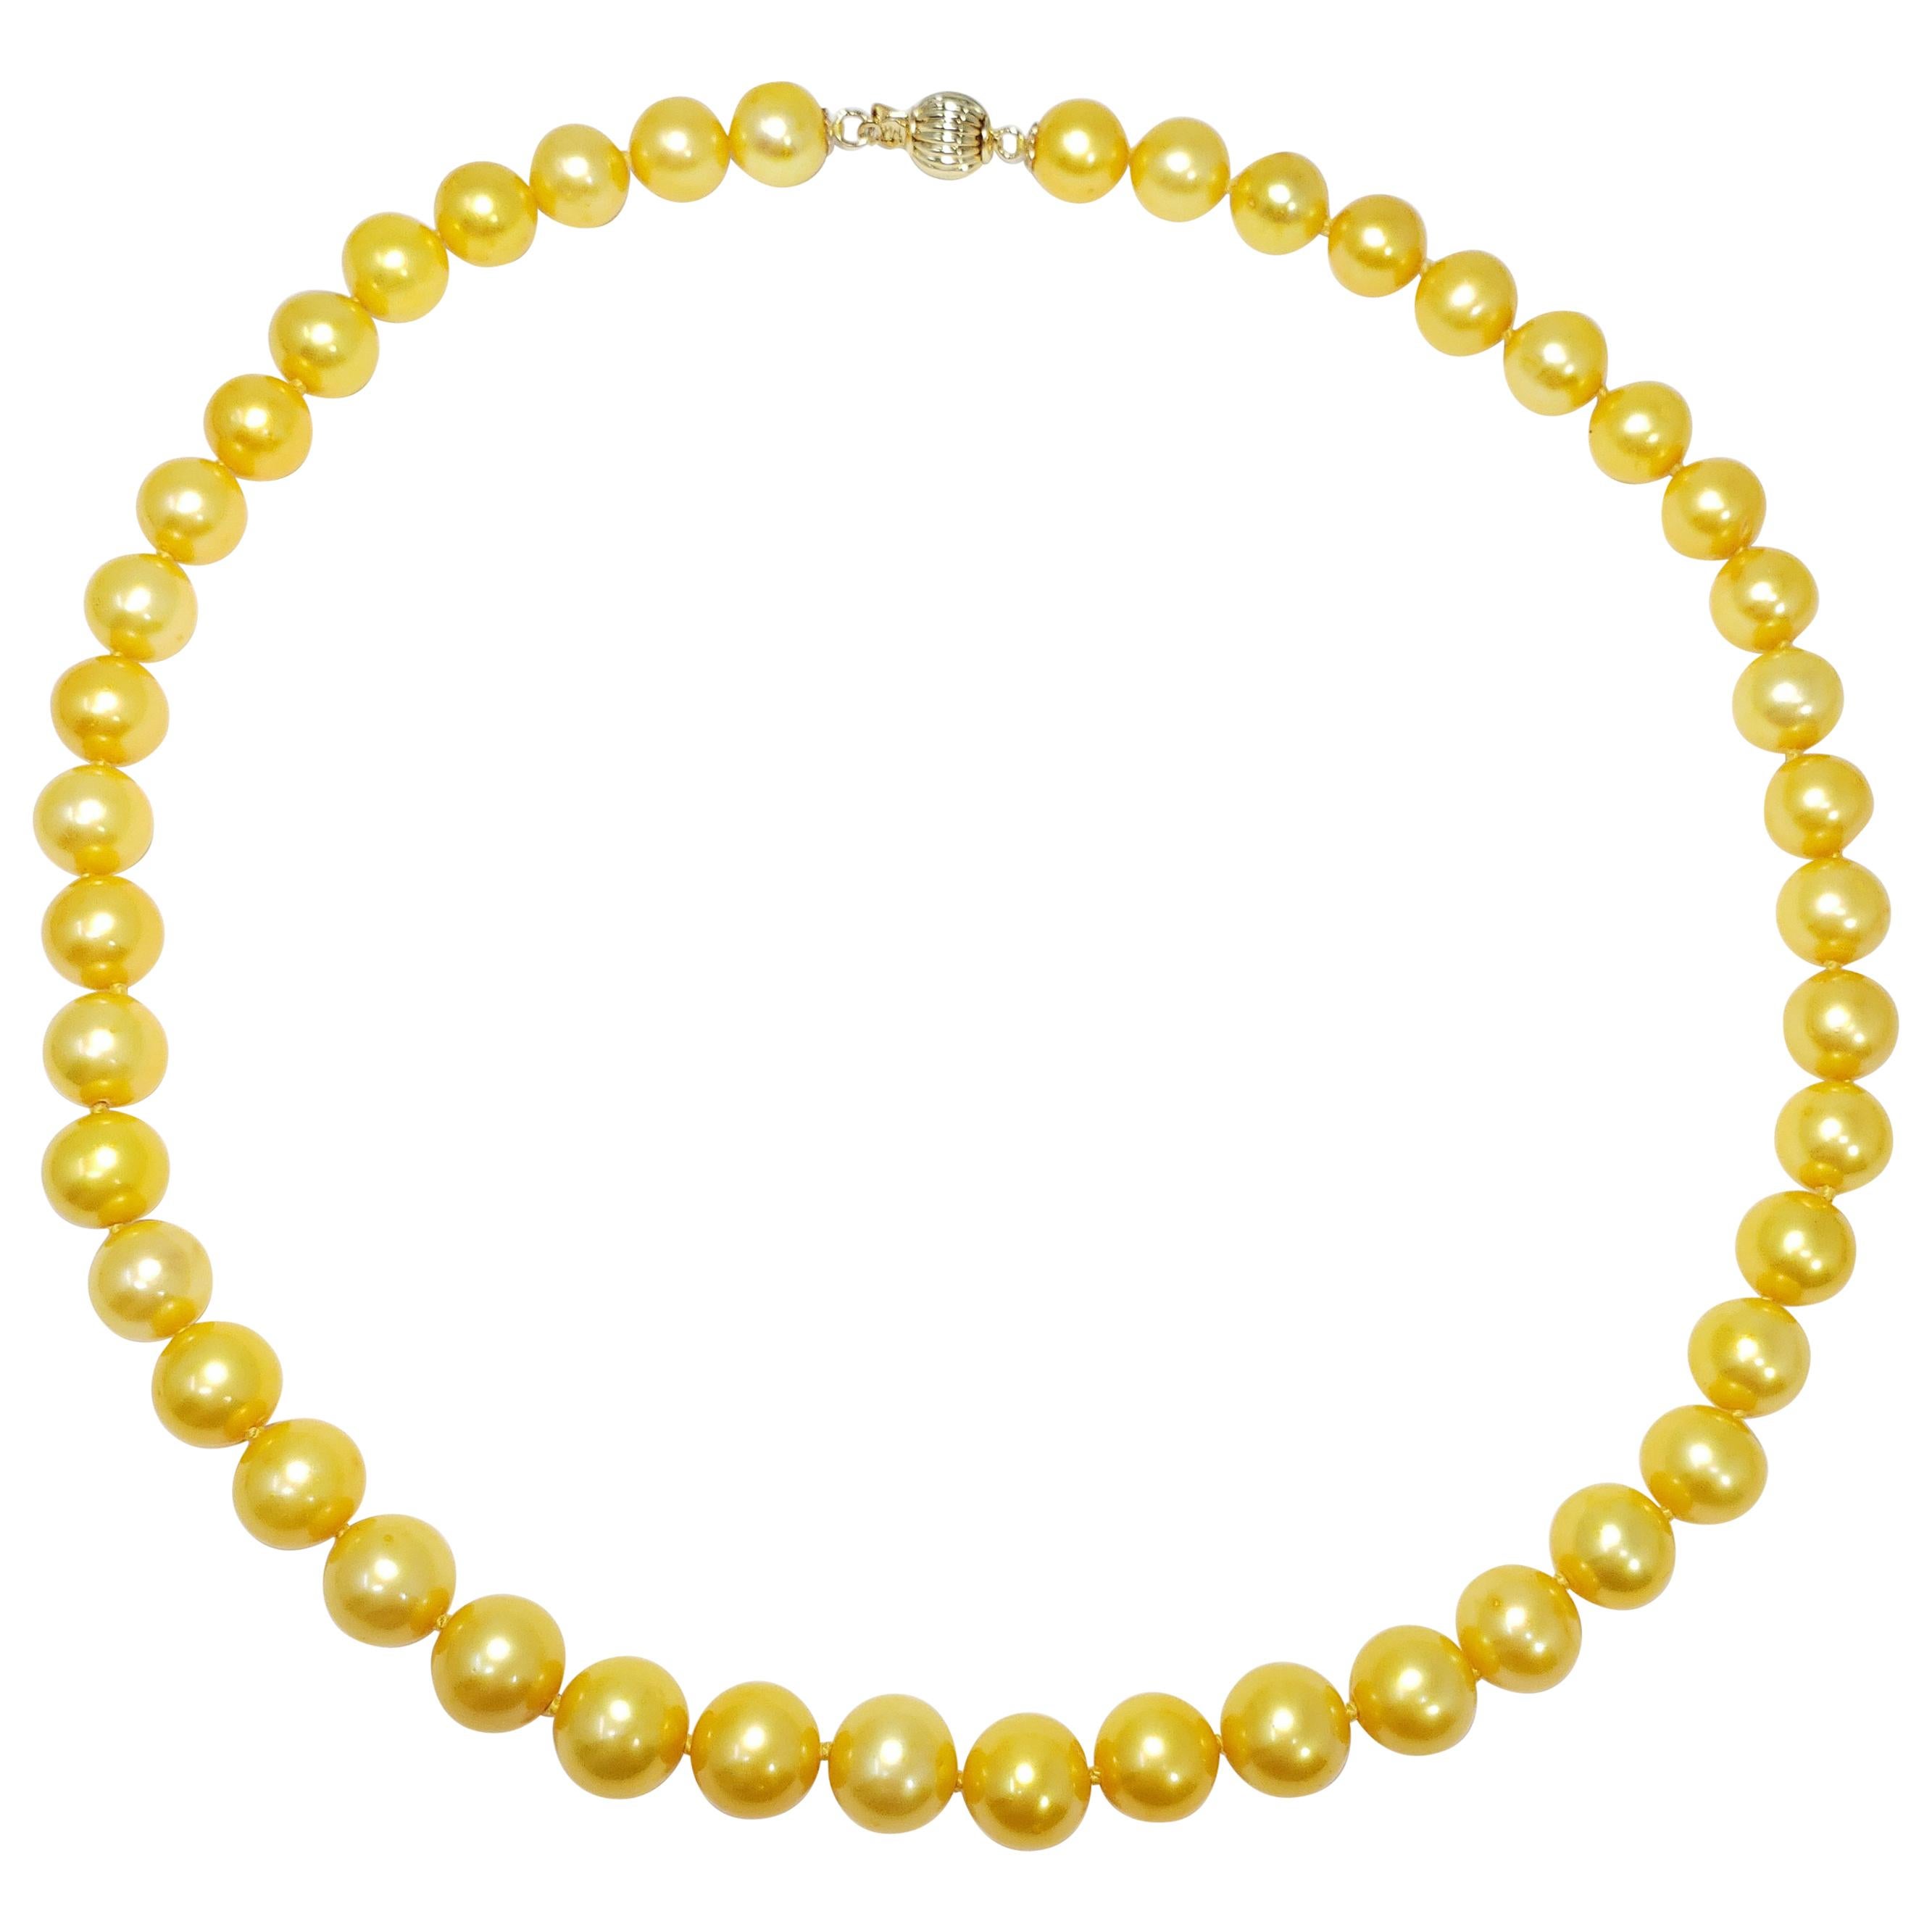 South Sea Pearl Knotted String Necklace with 14 Karat Yellow Gold Clasp For Sale